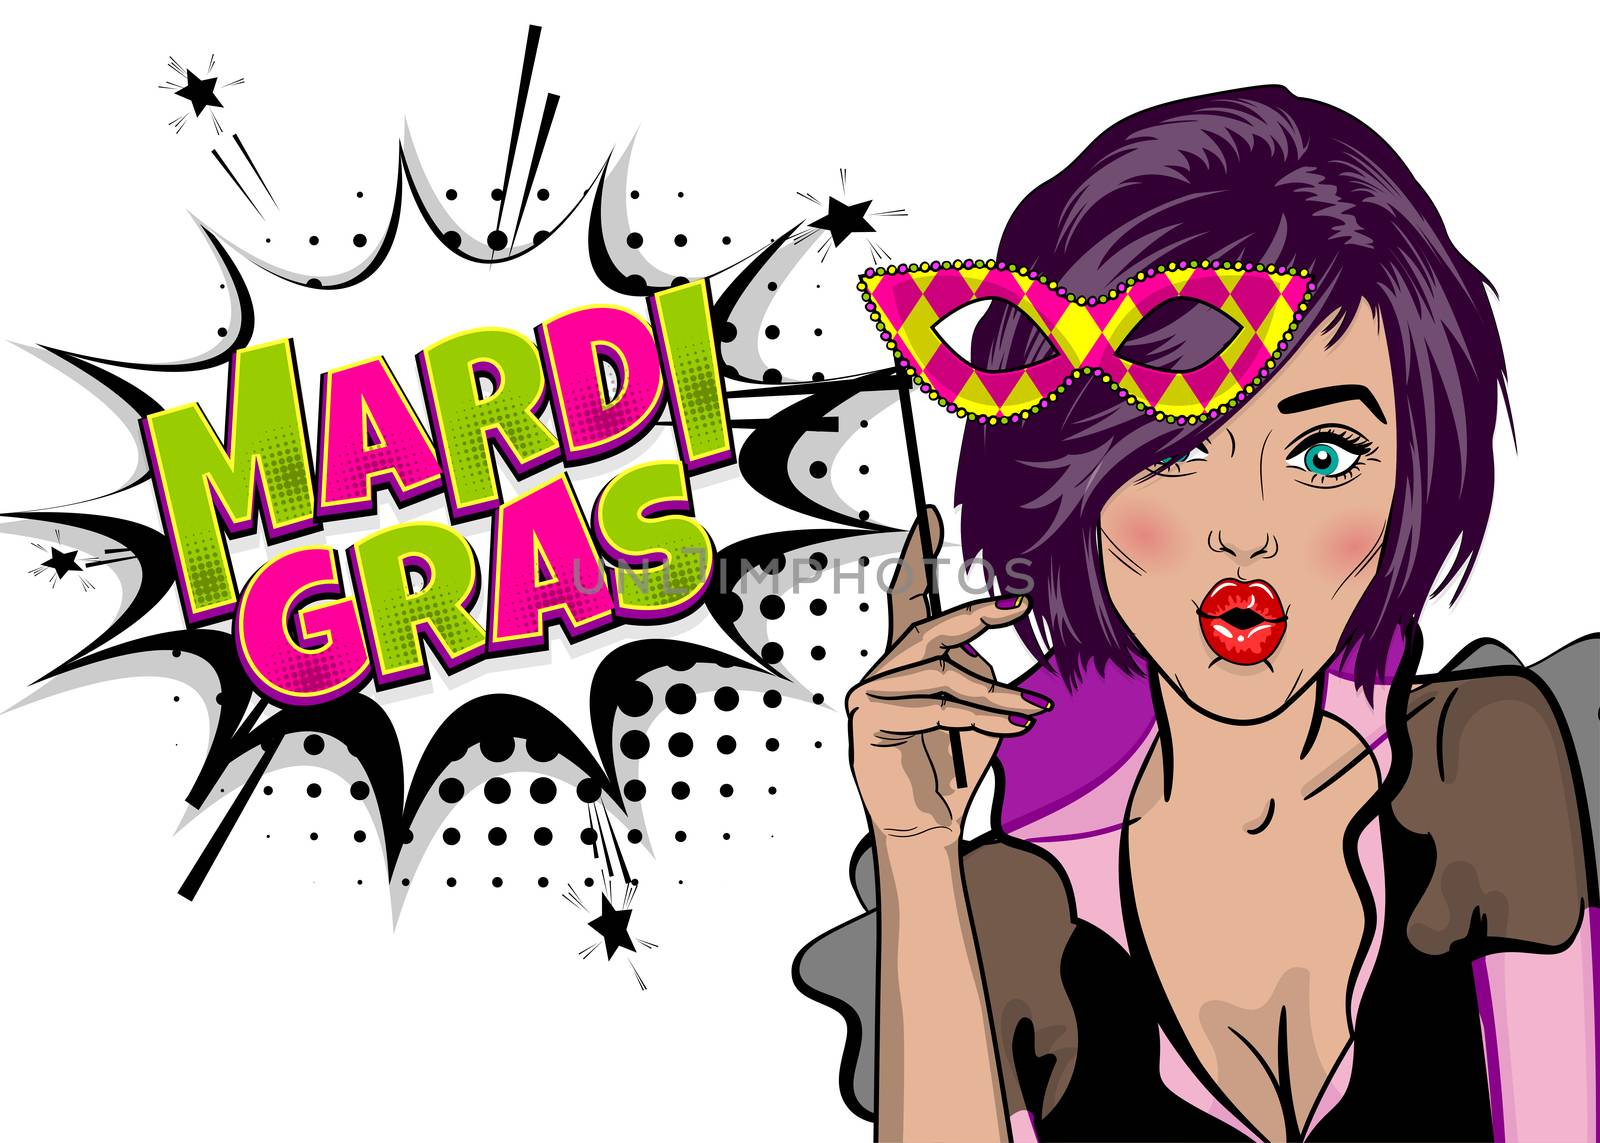 Pop art woman girl wow face kitsch fashion. Hold hand mask. Mardi Gras - Fat Tuesday carnival carnival in a French-speaking country. Comic book cartoon vector illustration pop art speech bubble.